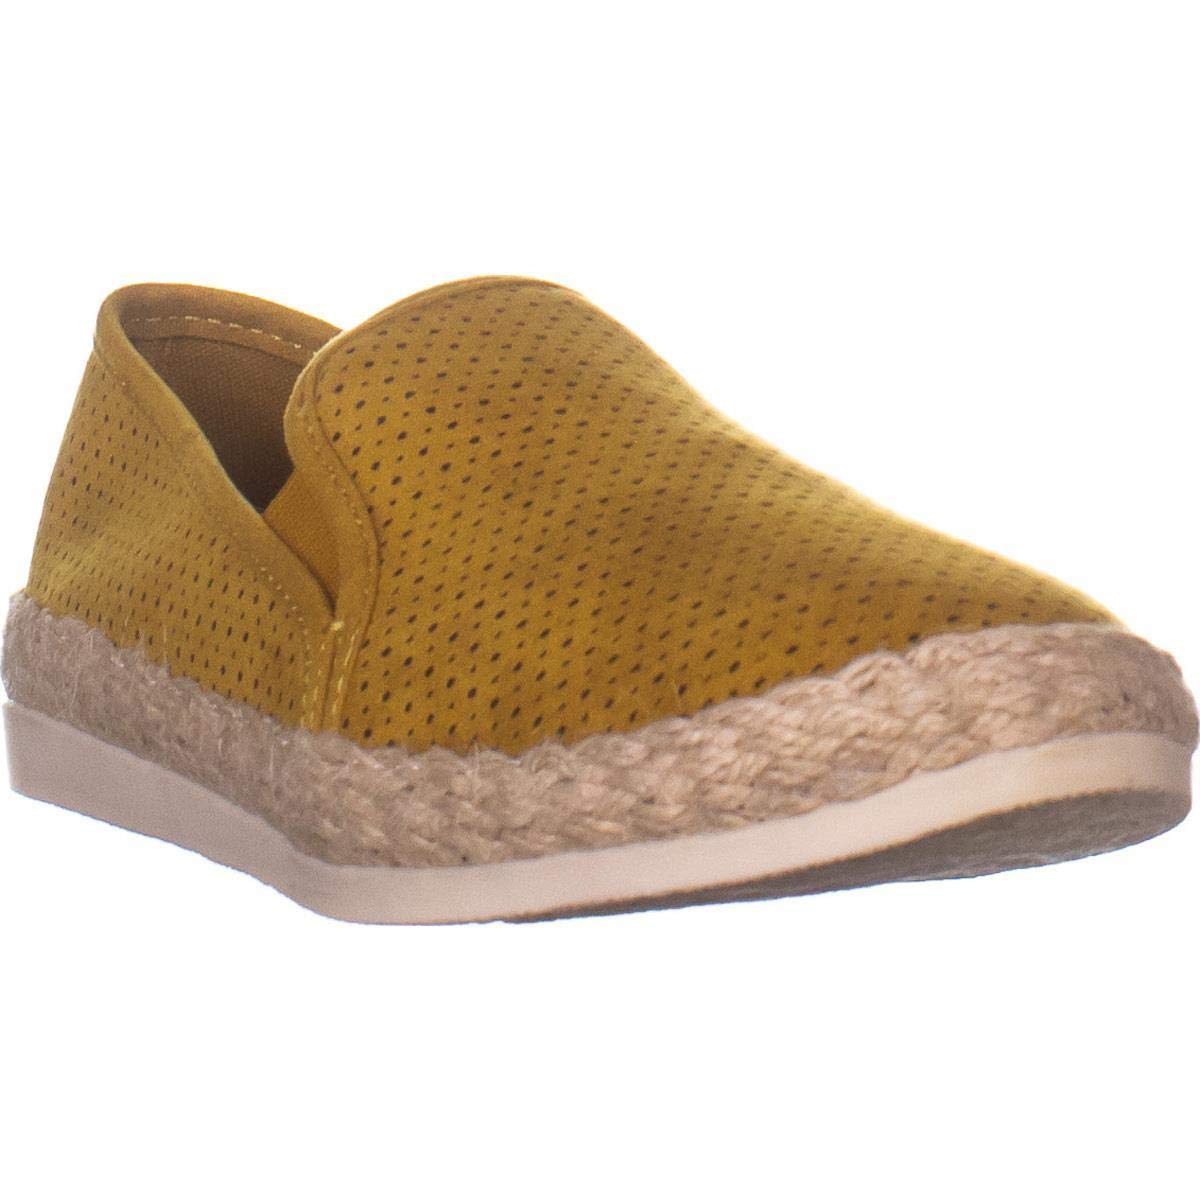 Esprit Womens Erin Fabric Closed Toe Loafers, Mustard, Size 9.5 4BxT ...